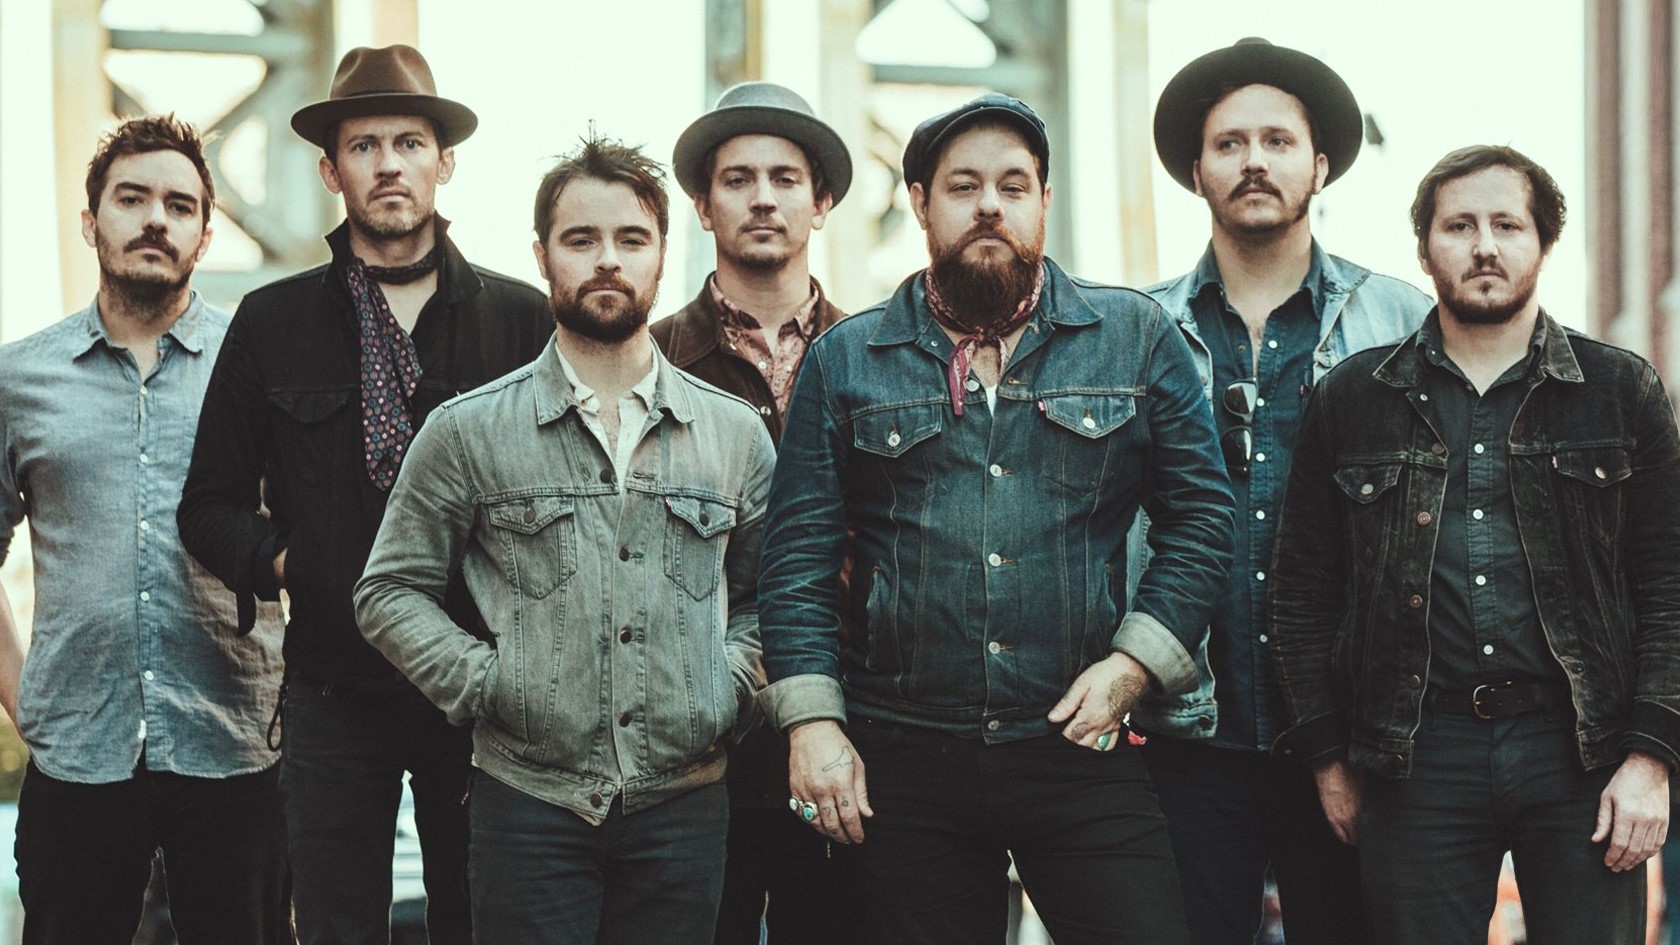 LIVE: An Intimate Set From Nathaniel Rateliff and The Night Sweats